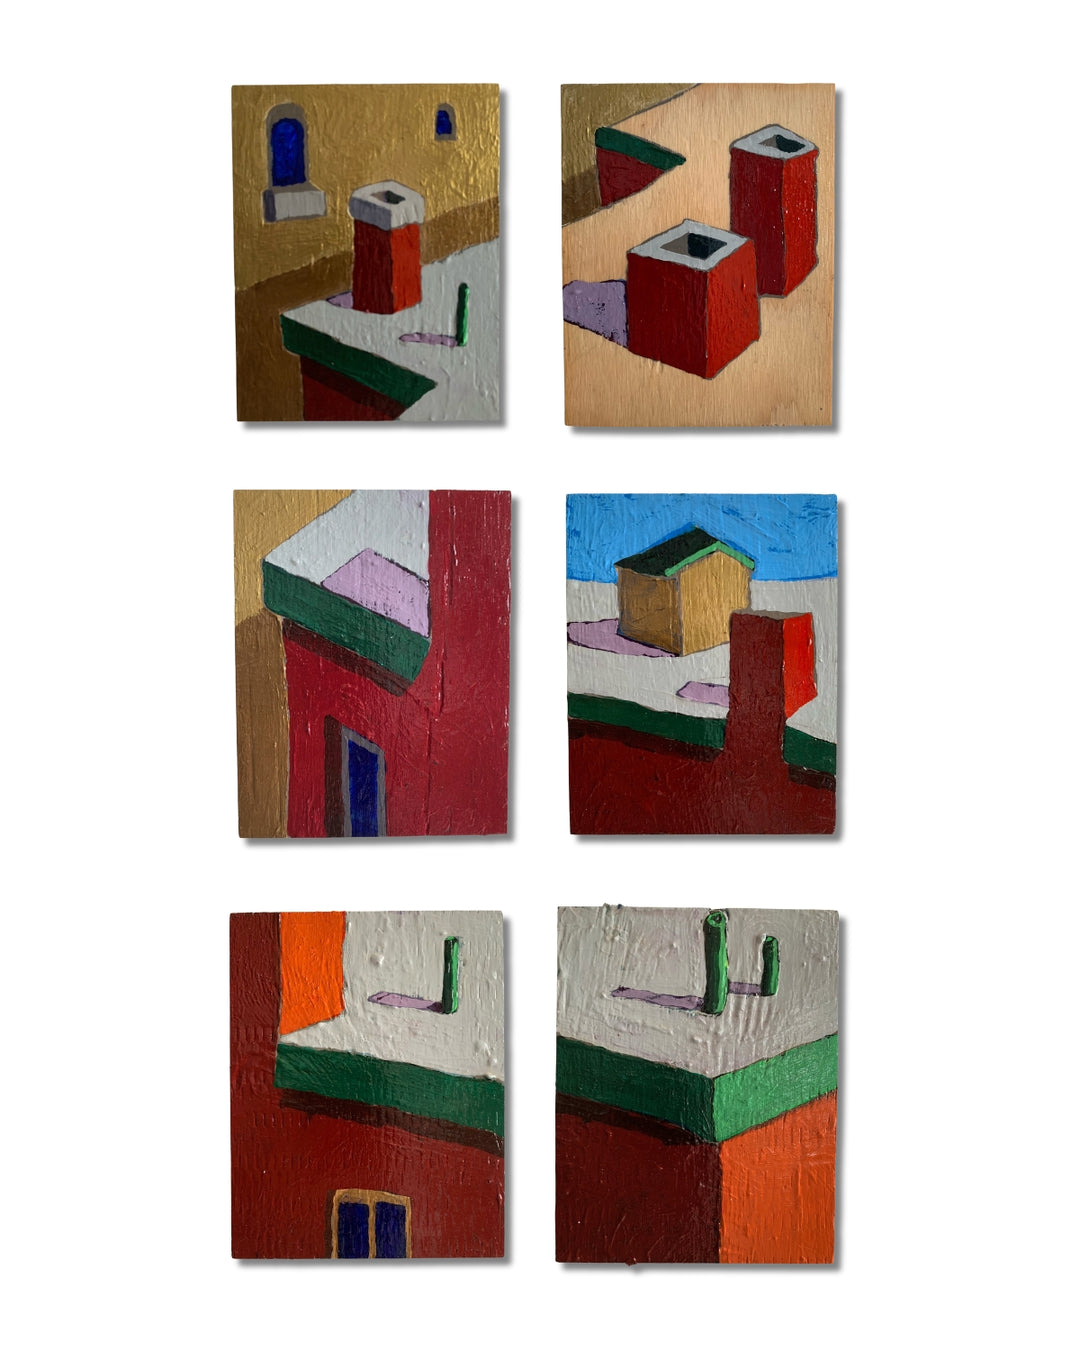 Imaginary Rooftops, set of 6